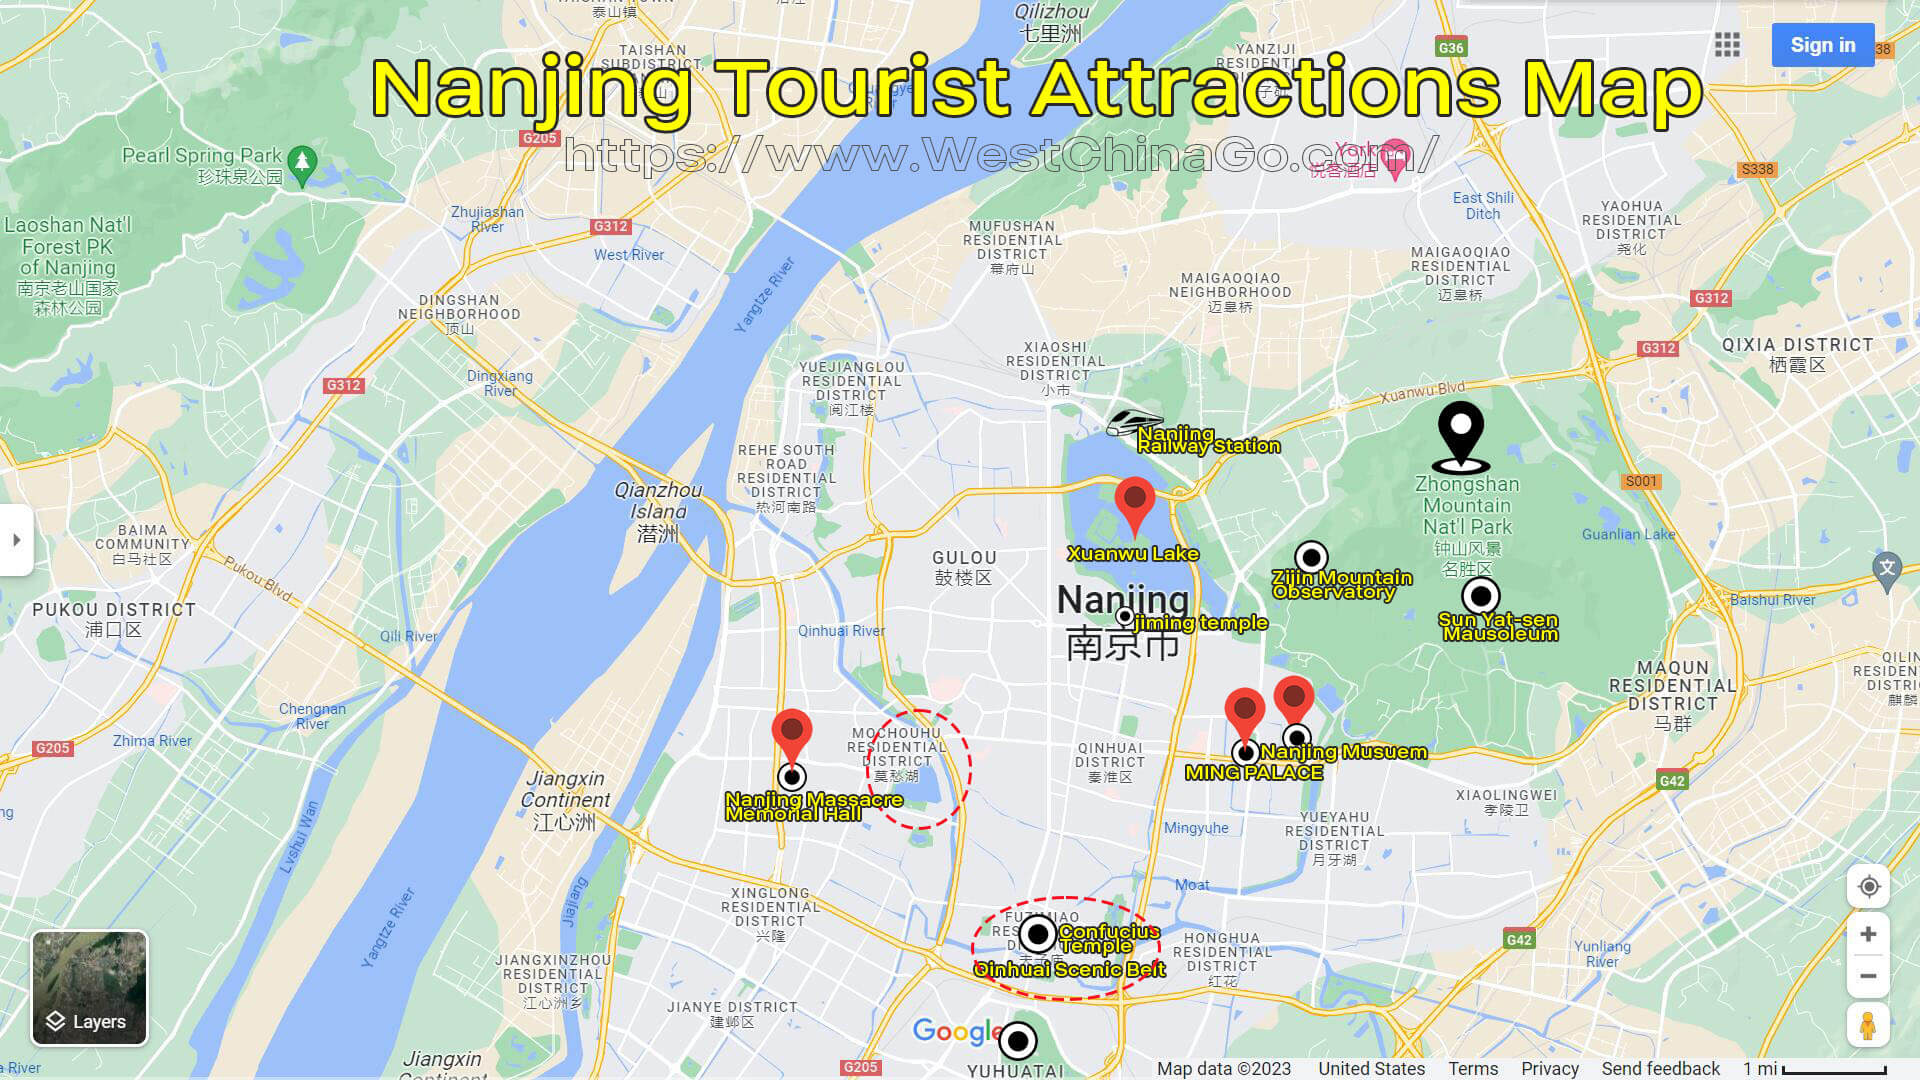 Nanjing Tourist Attractions Map